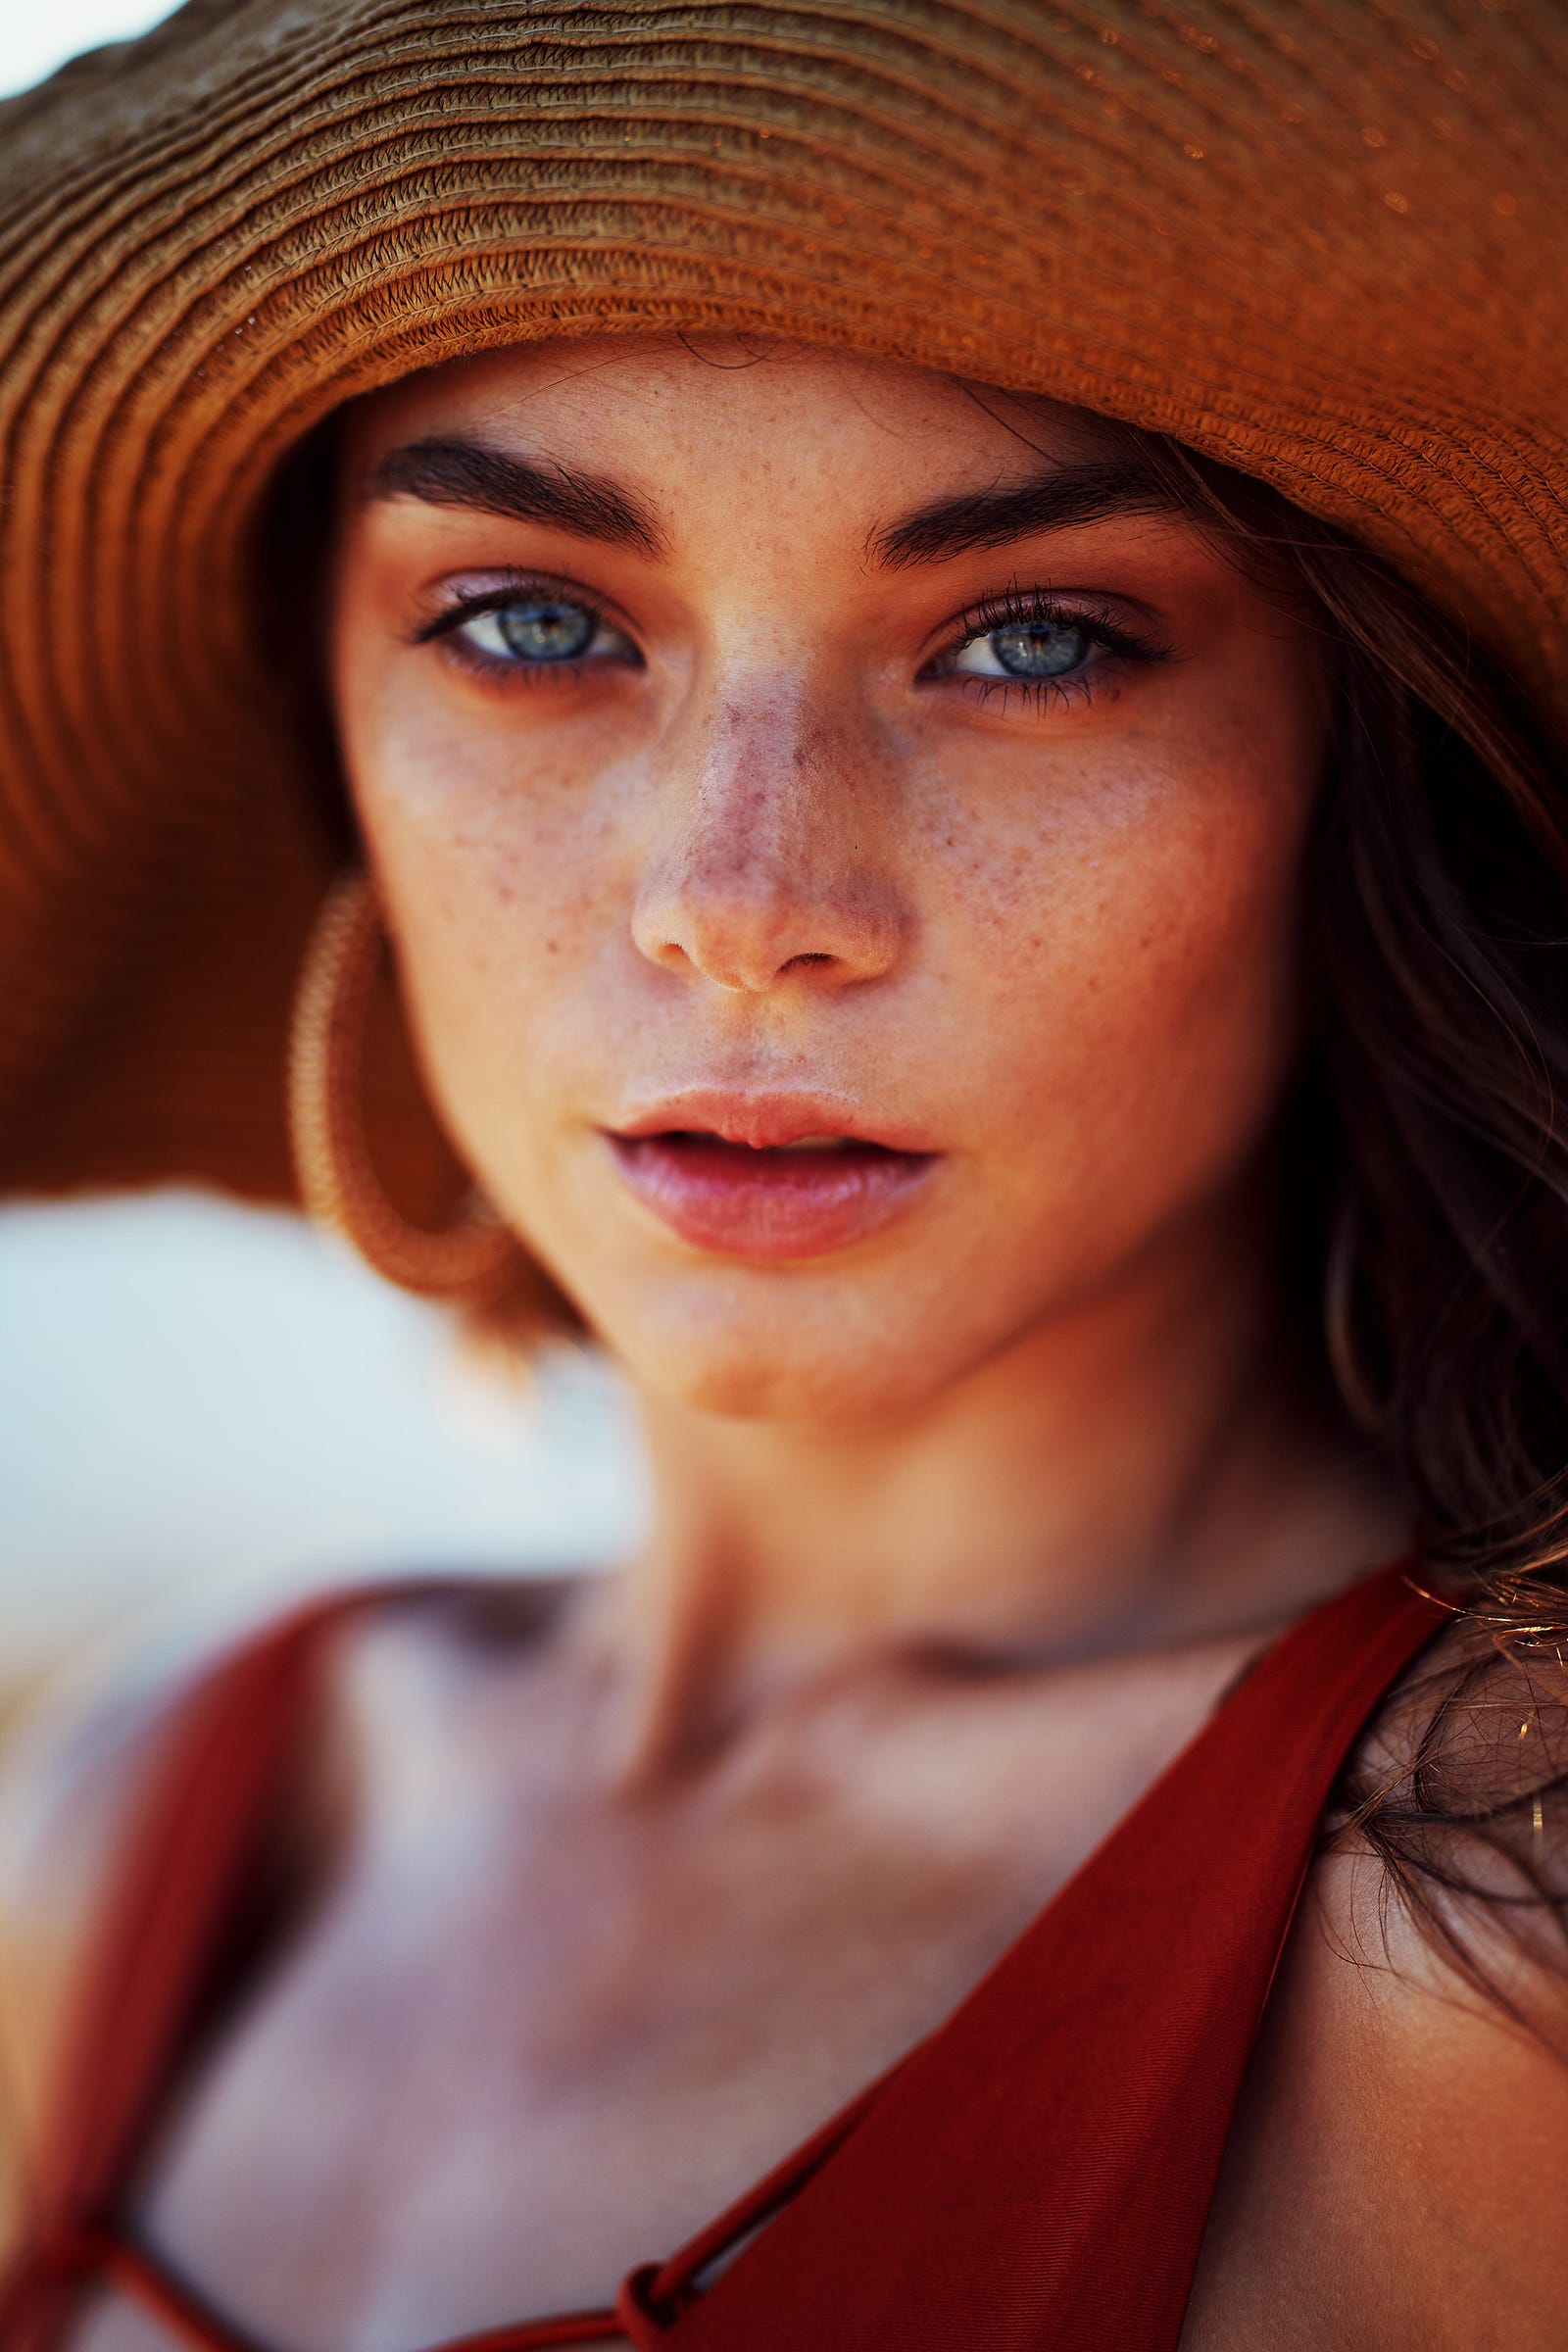 A beautiful, freckled woman looks at us with a neutral expression. She dons a straw hat, has blue eyes, and large wooden hoop earings. Solar exposure is the leading cause of skin cancer, including melanoma.